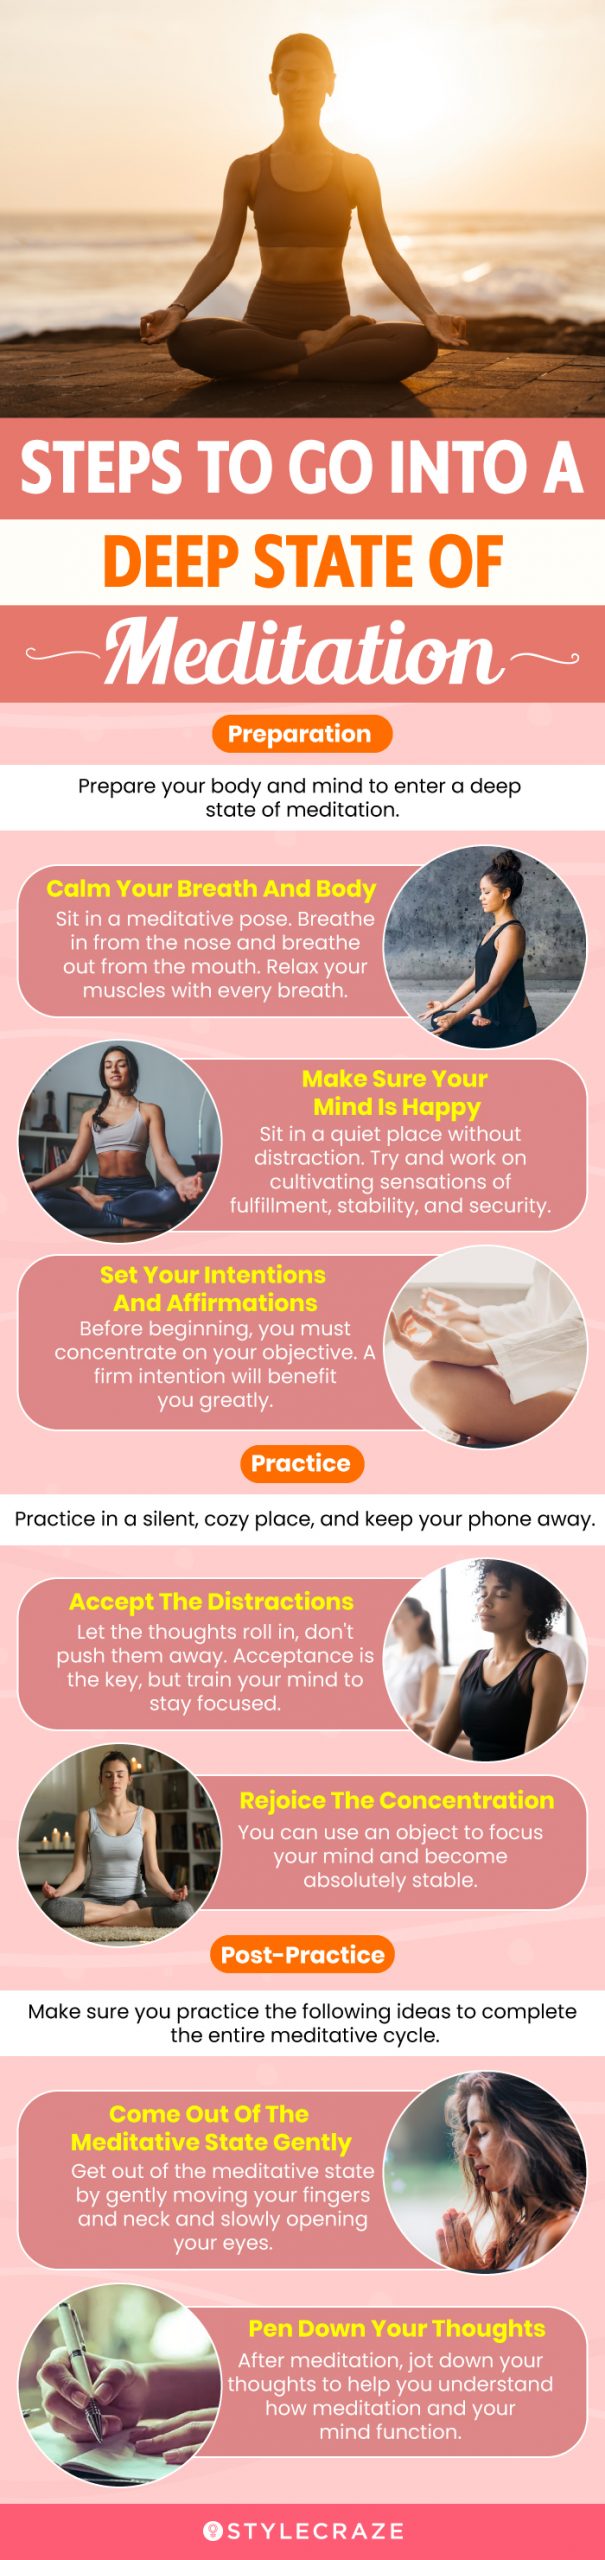 steps to go into a deep state of meditation (infographic)